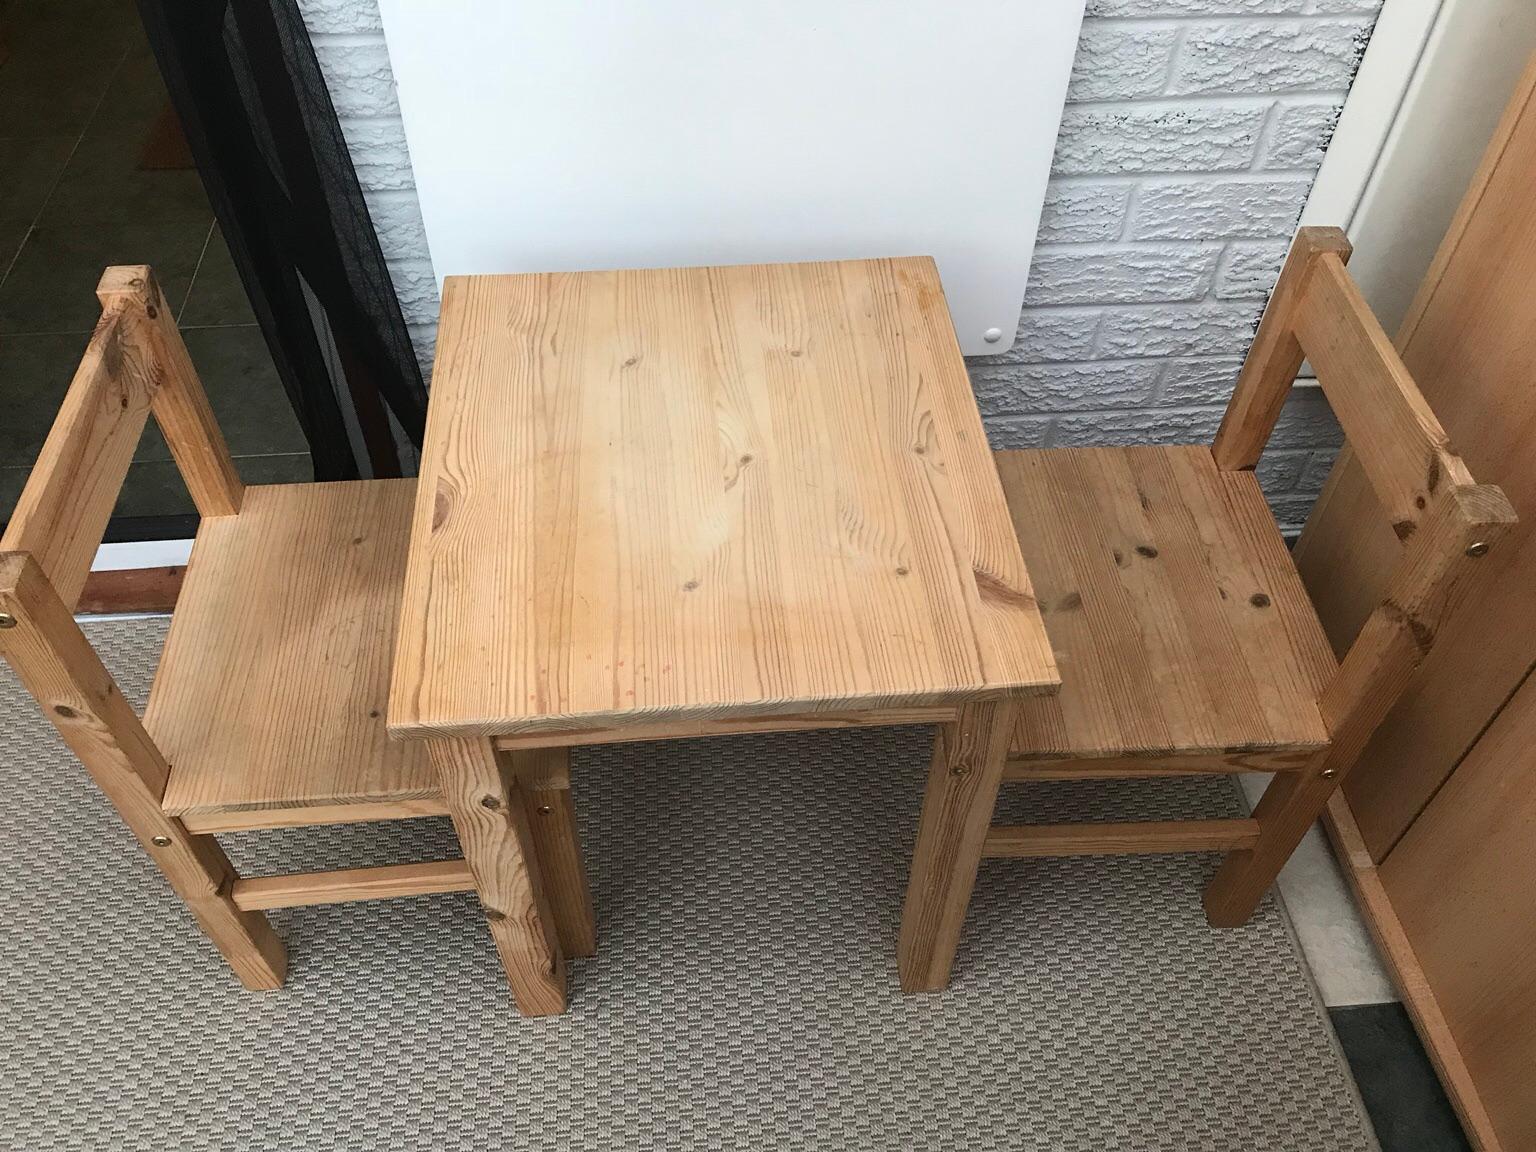 argos kids table chairs